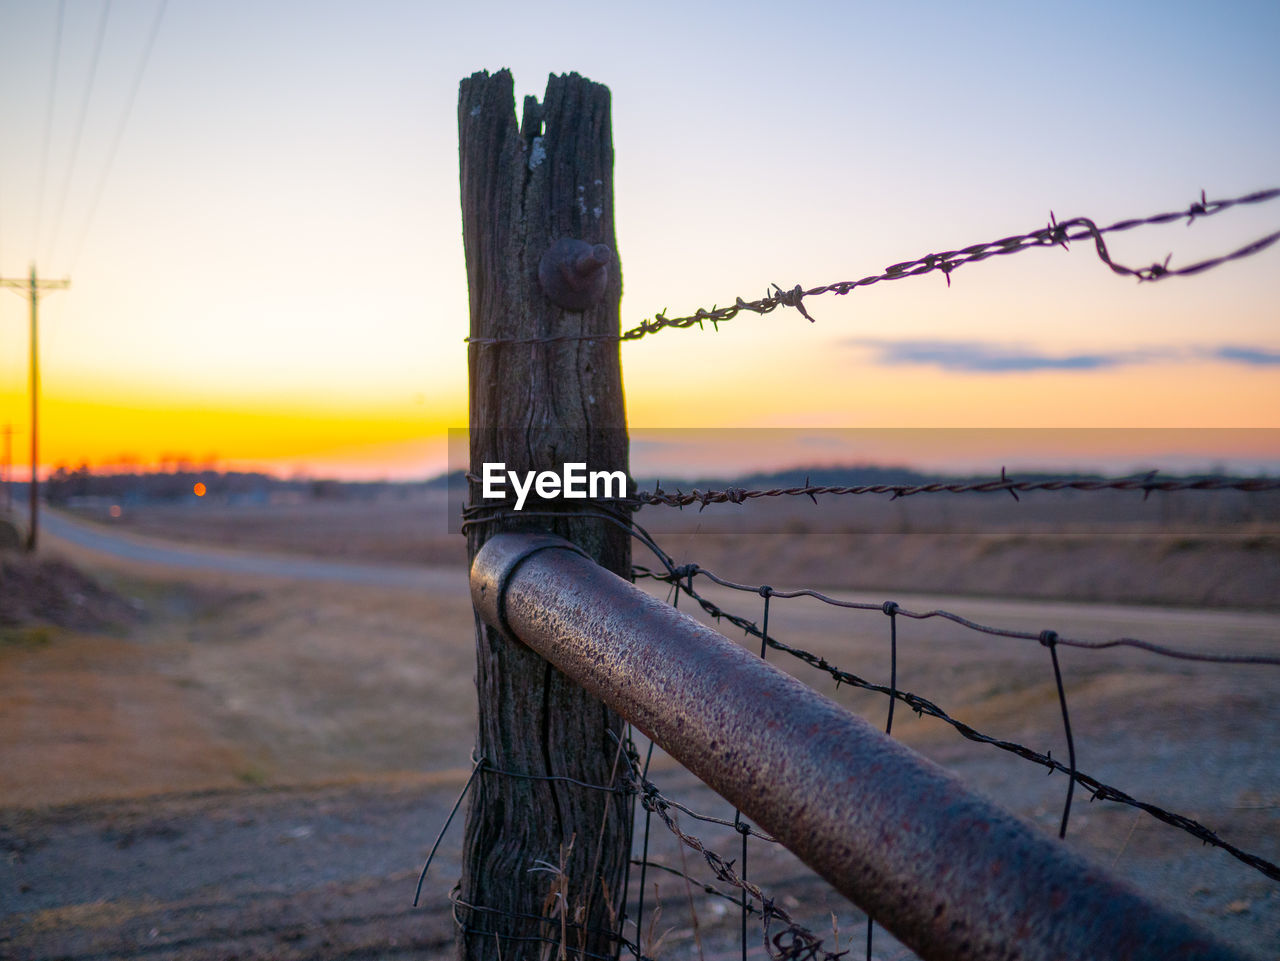 CLOSE-UP OF BARBED WIRE ON FIELD AGAINST SKY DURING SUNSET